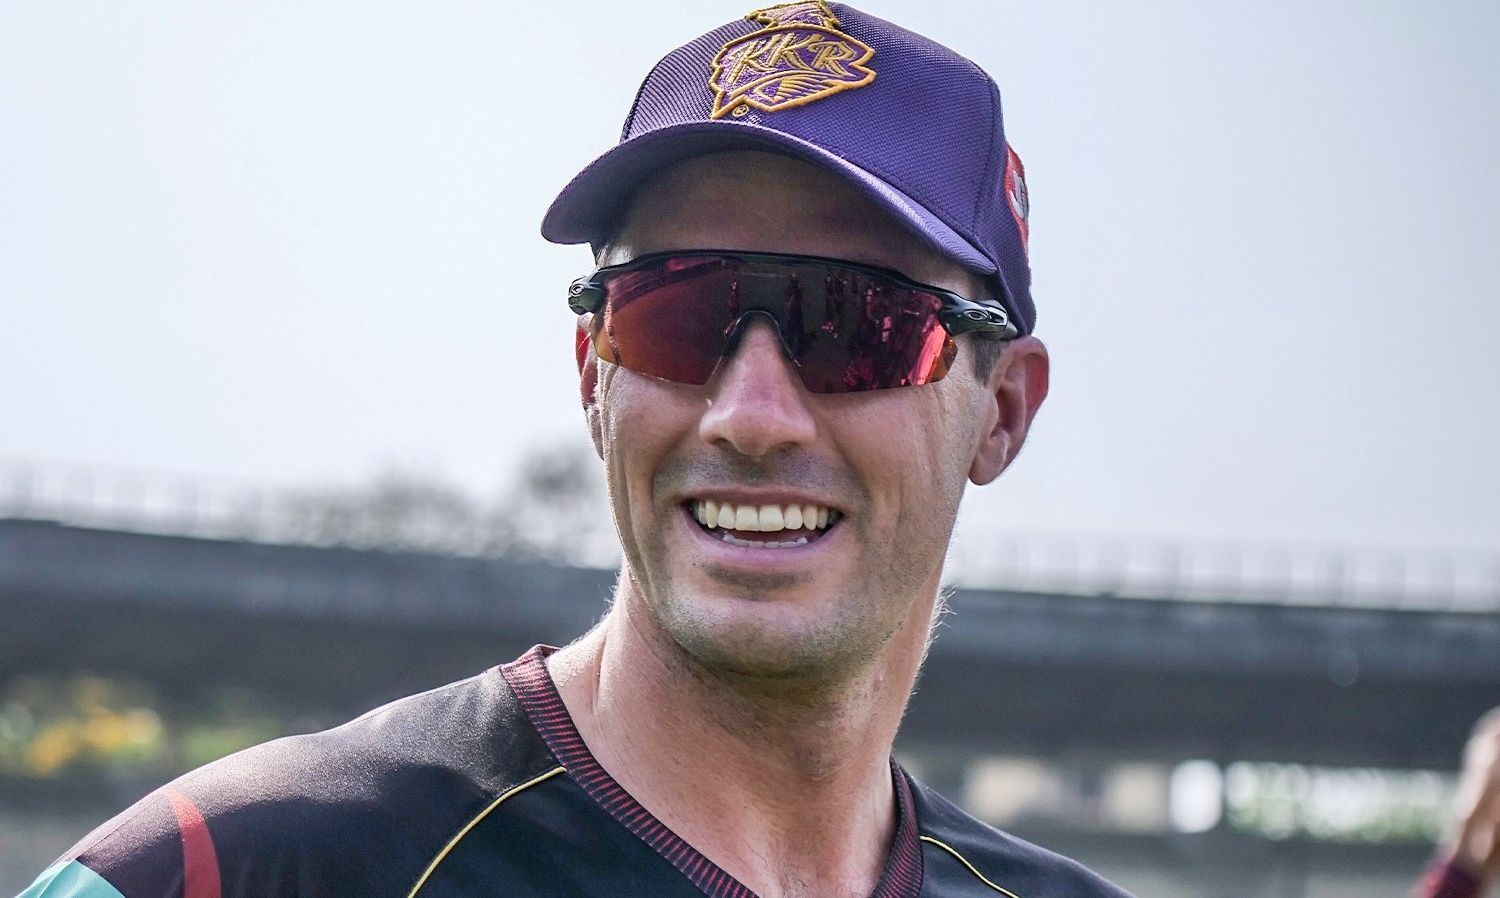 KKR pacer Pat Cummins during a training session.